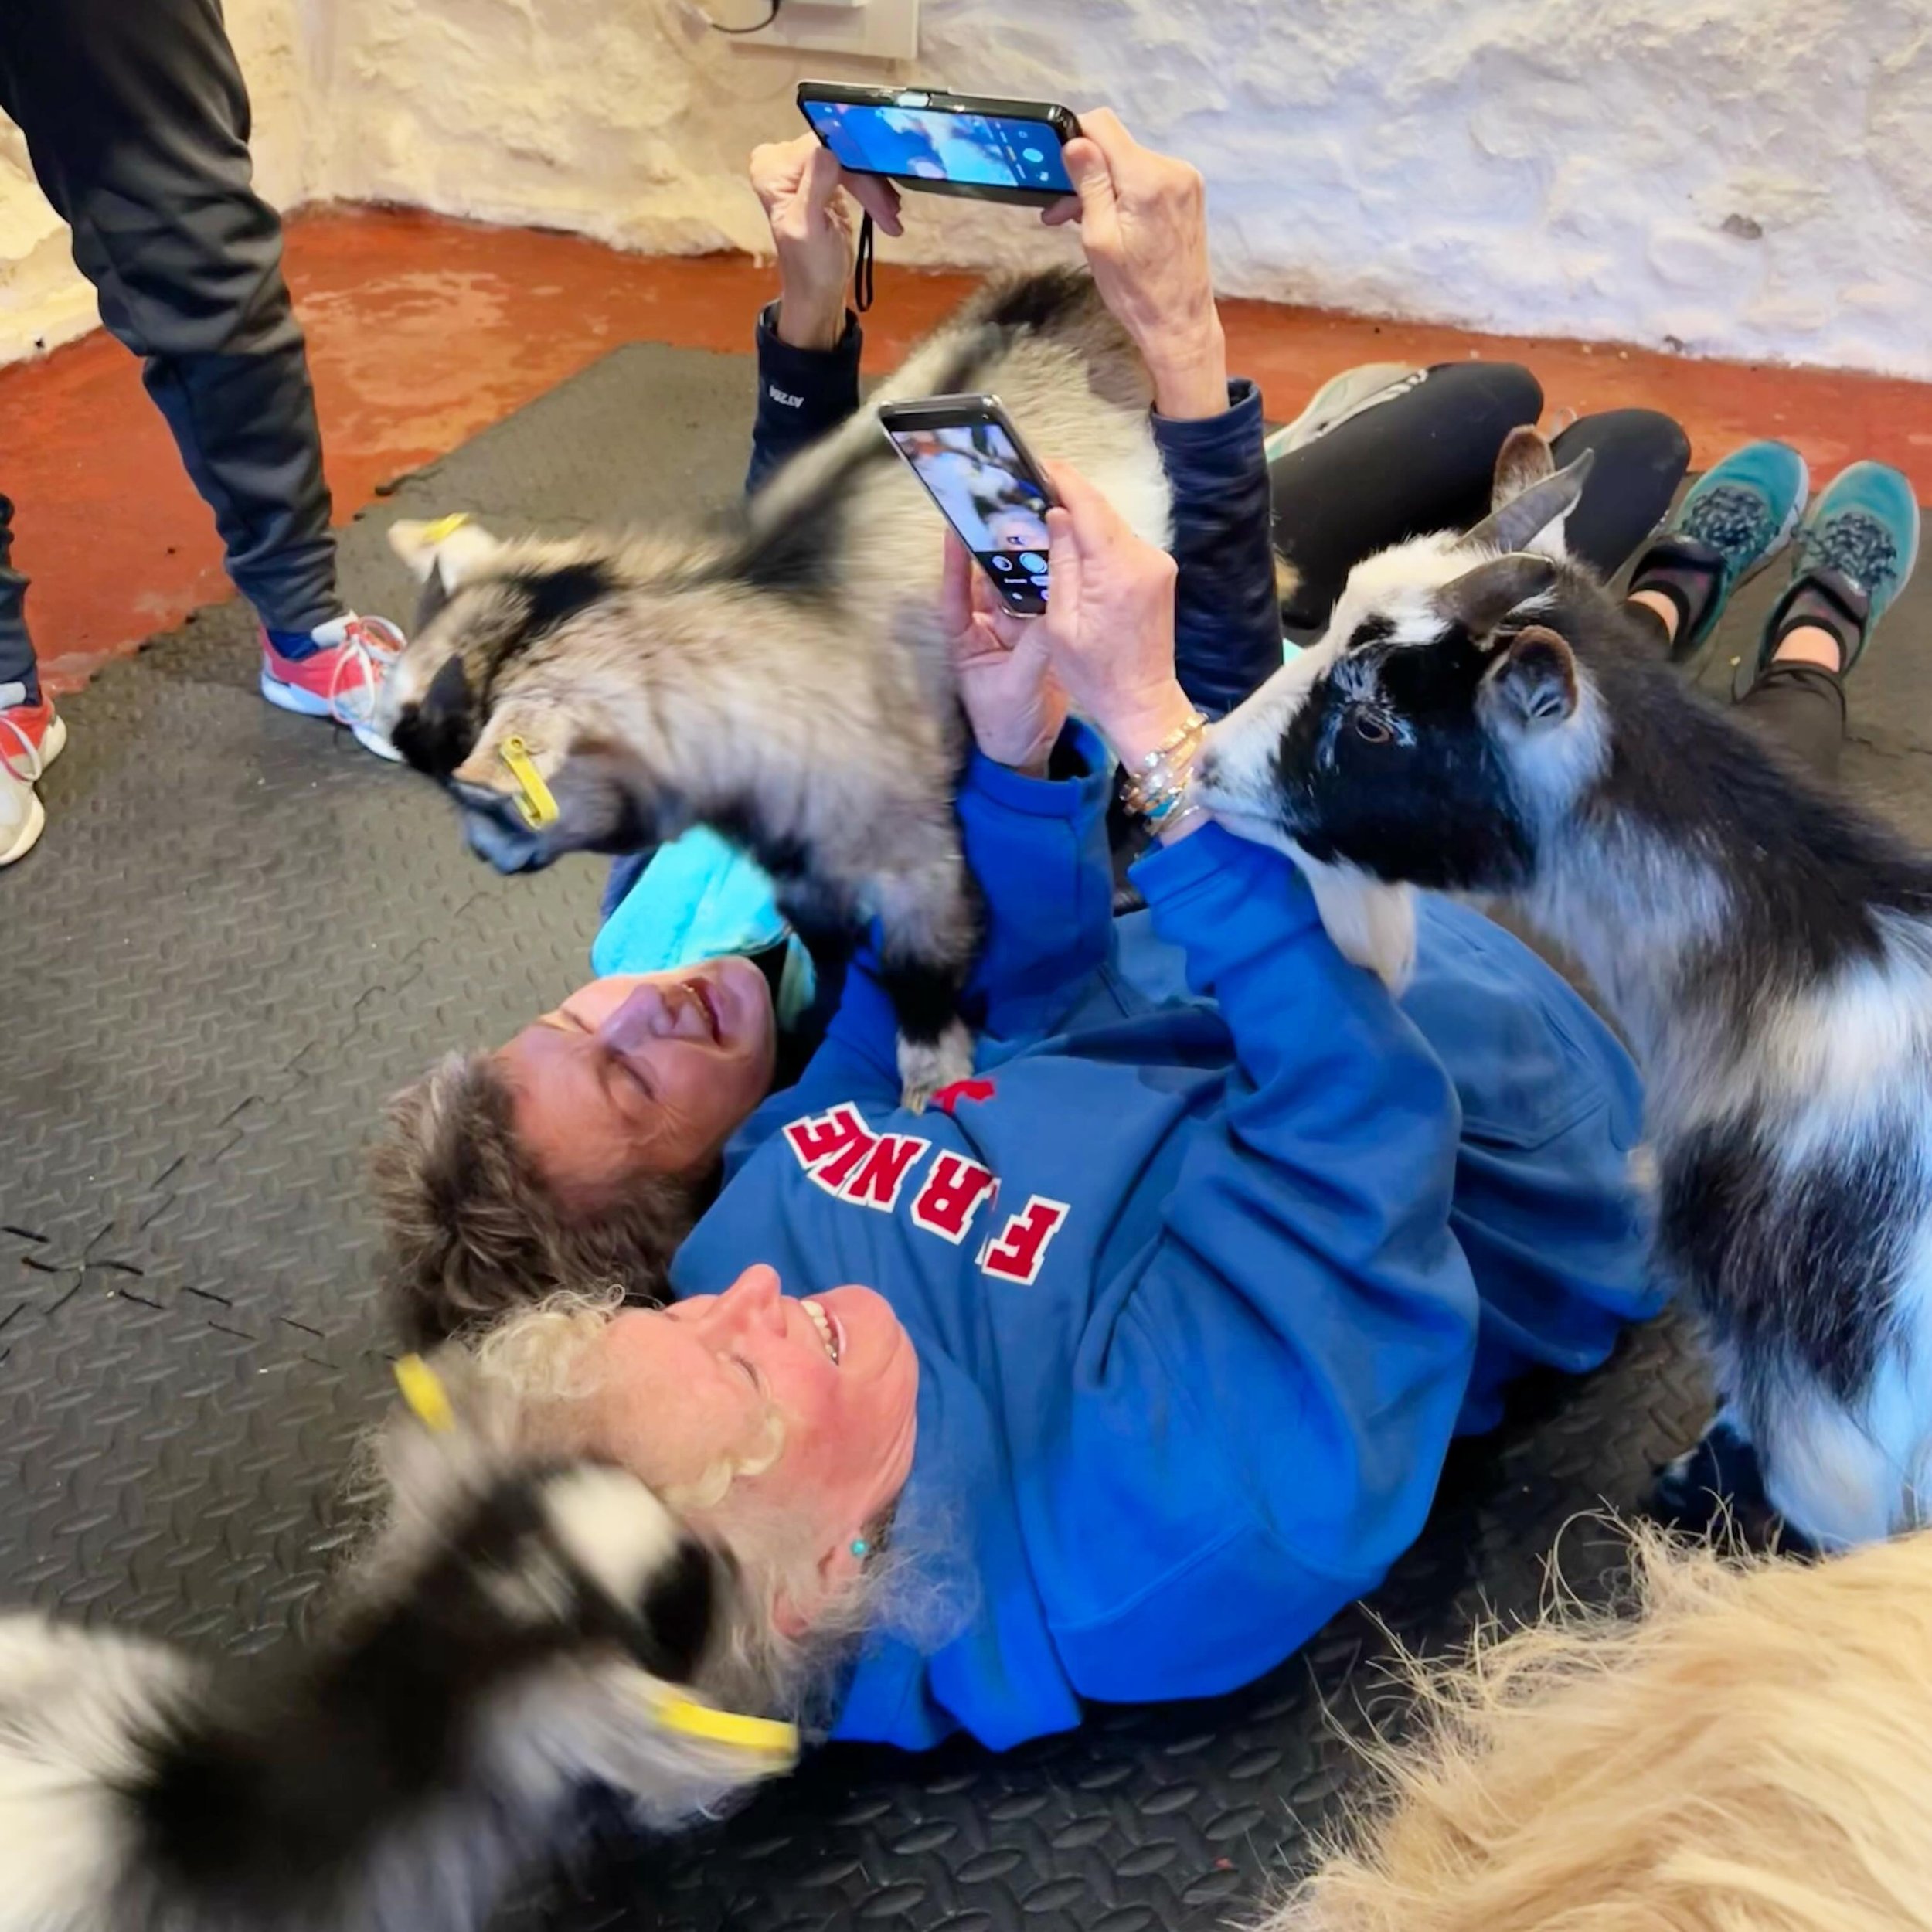 Will you get the perfect goat selfie? Tickets are selling fast for April, get yours before we sell out! @thepilatesattic 

#goats #goatpilates #pygmygoats #pygmygoatpilates #goatyoga #edinburgh #fife #scotland #selfie